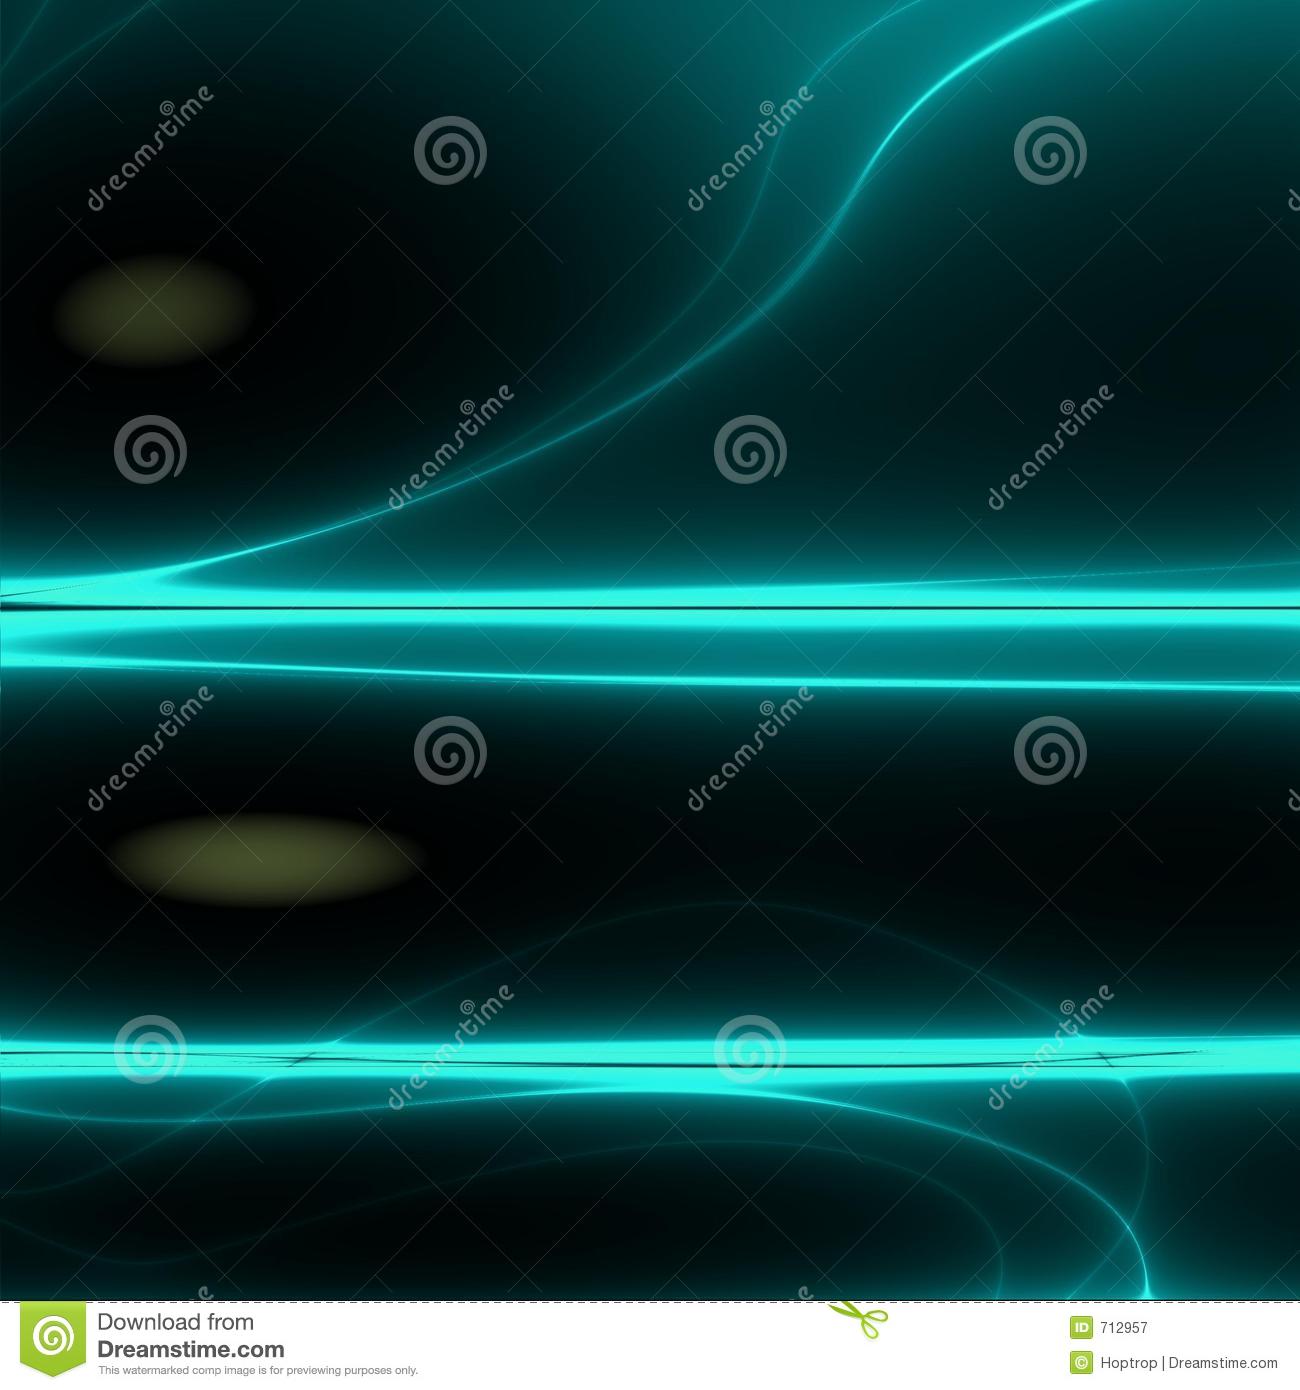 Abstract Blue Lines With Glow Royalty Free Stock Photography   Image